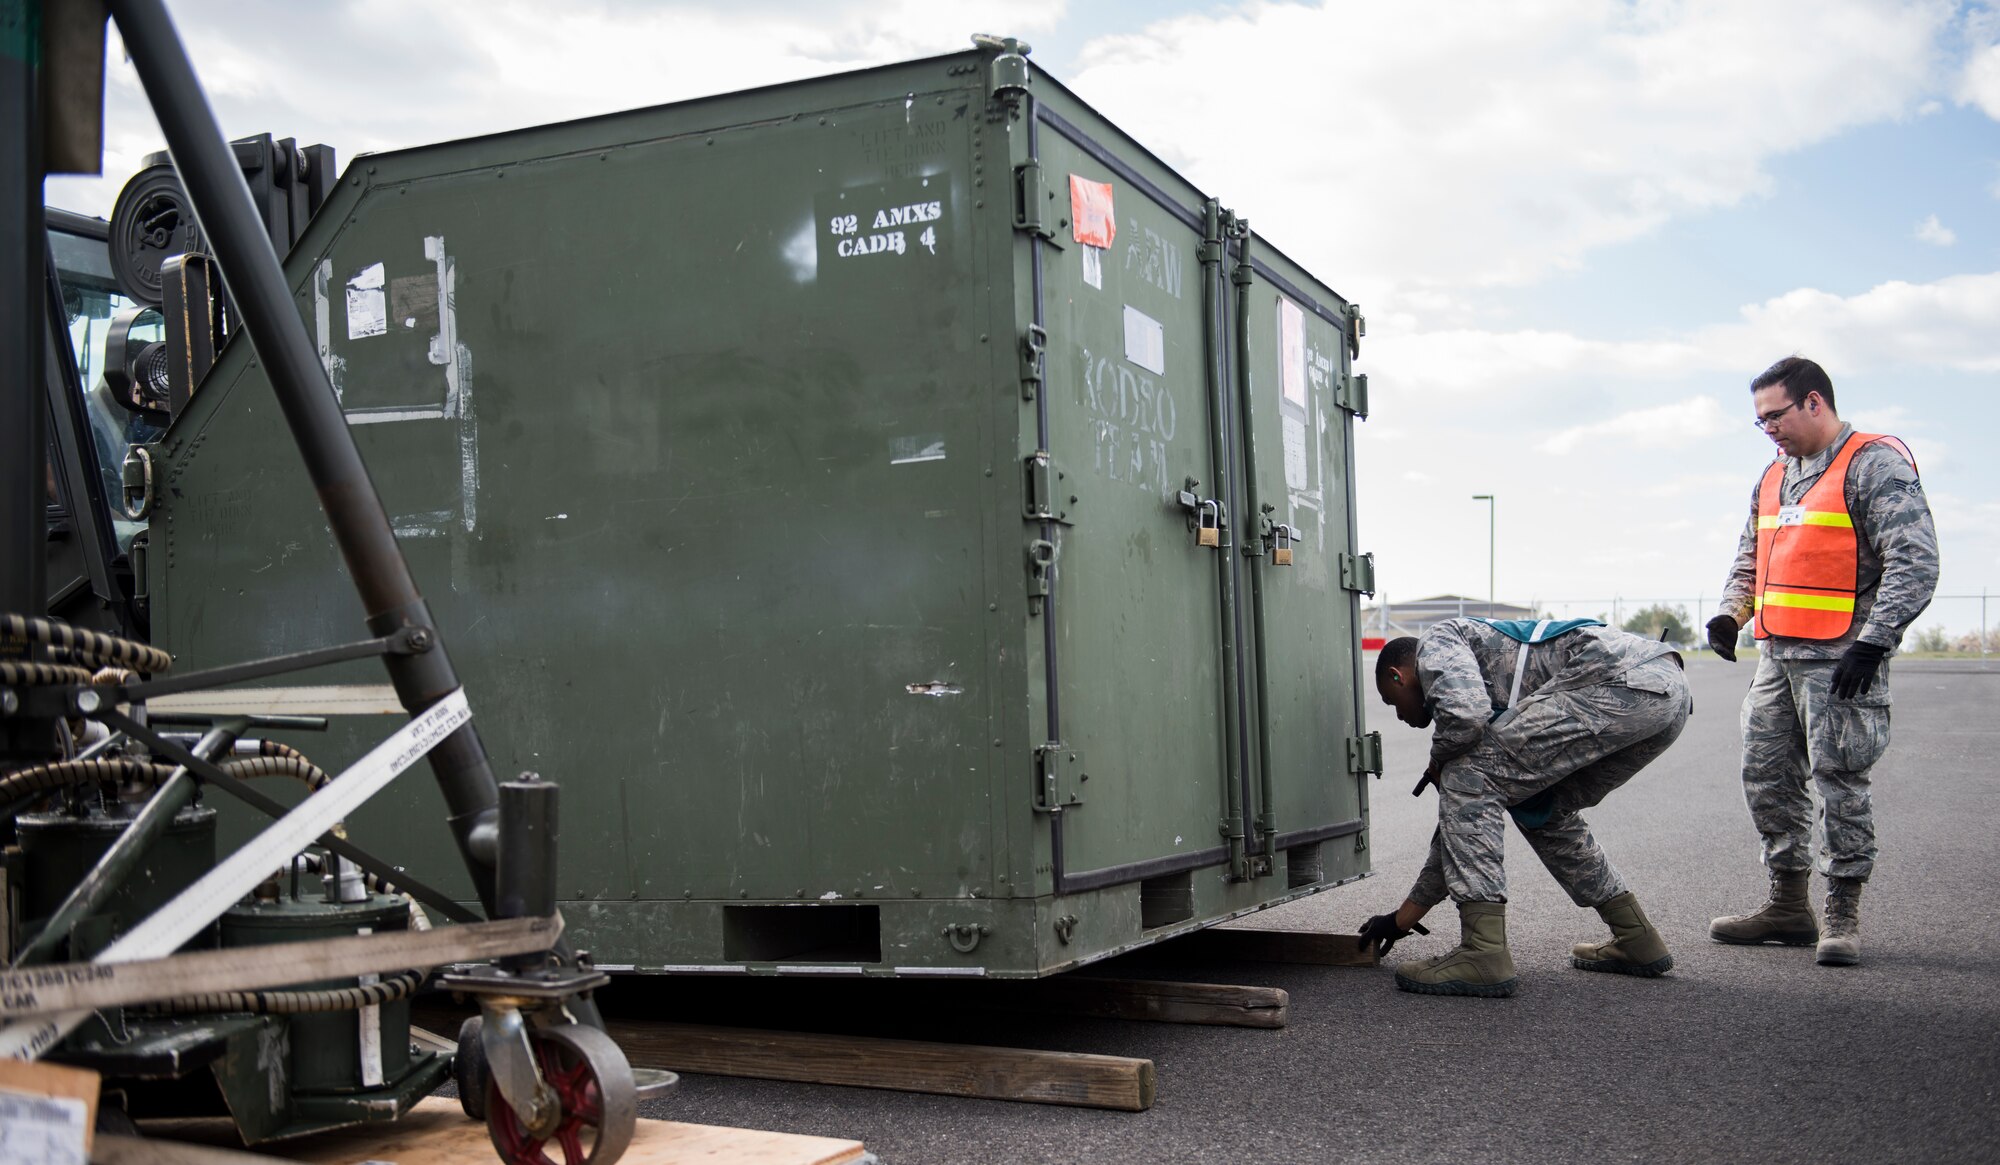 92nd Logistics Readiness Squadron Airmen conduct a cargo load during an exercise at Fairchild Air Force Base, Washington, May 2, 2018. Team Fairchild practiced their ability to perform during contingency operations, April 30 through May 11, giving personnel the hands-on experience needed to effectively deploy Airmen and assets downrange at a moment’s notice. (U.S. Air Force Photo/Senior Airman Sean Campbell)